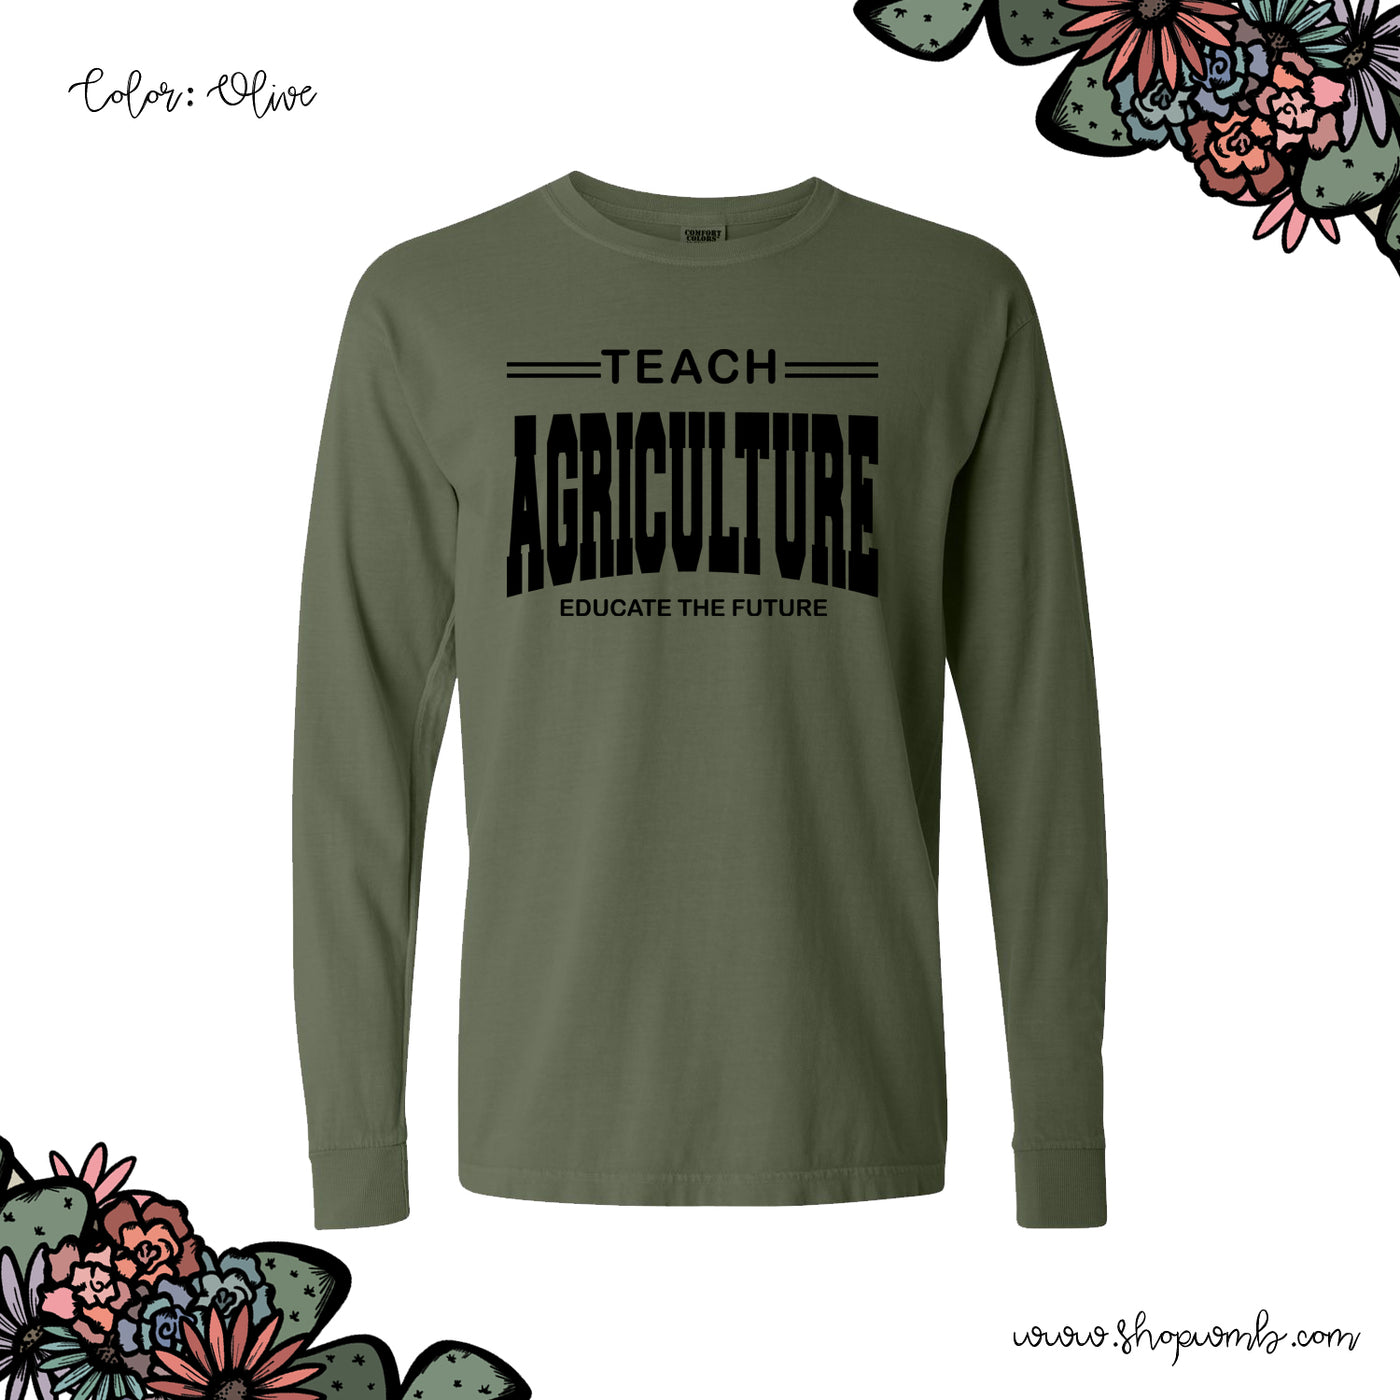 Teach Agriculture - Educate The Future LONG SLEEVE T-Shirt (S-3XL) - Multiple Colors!